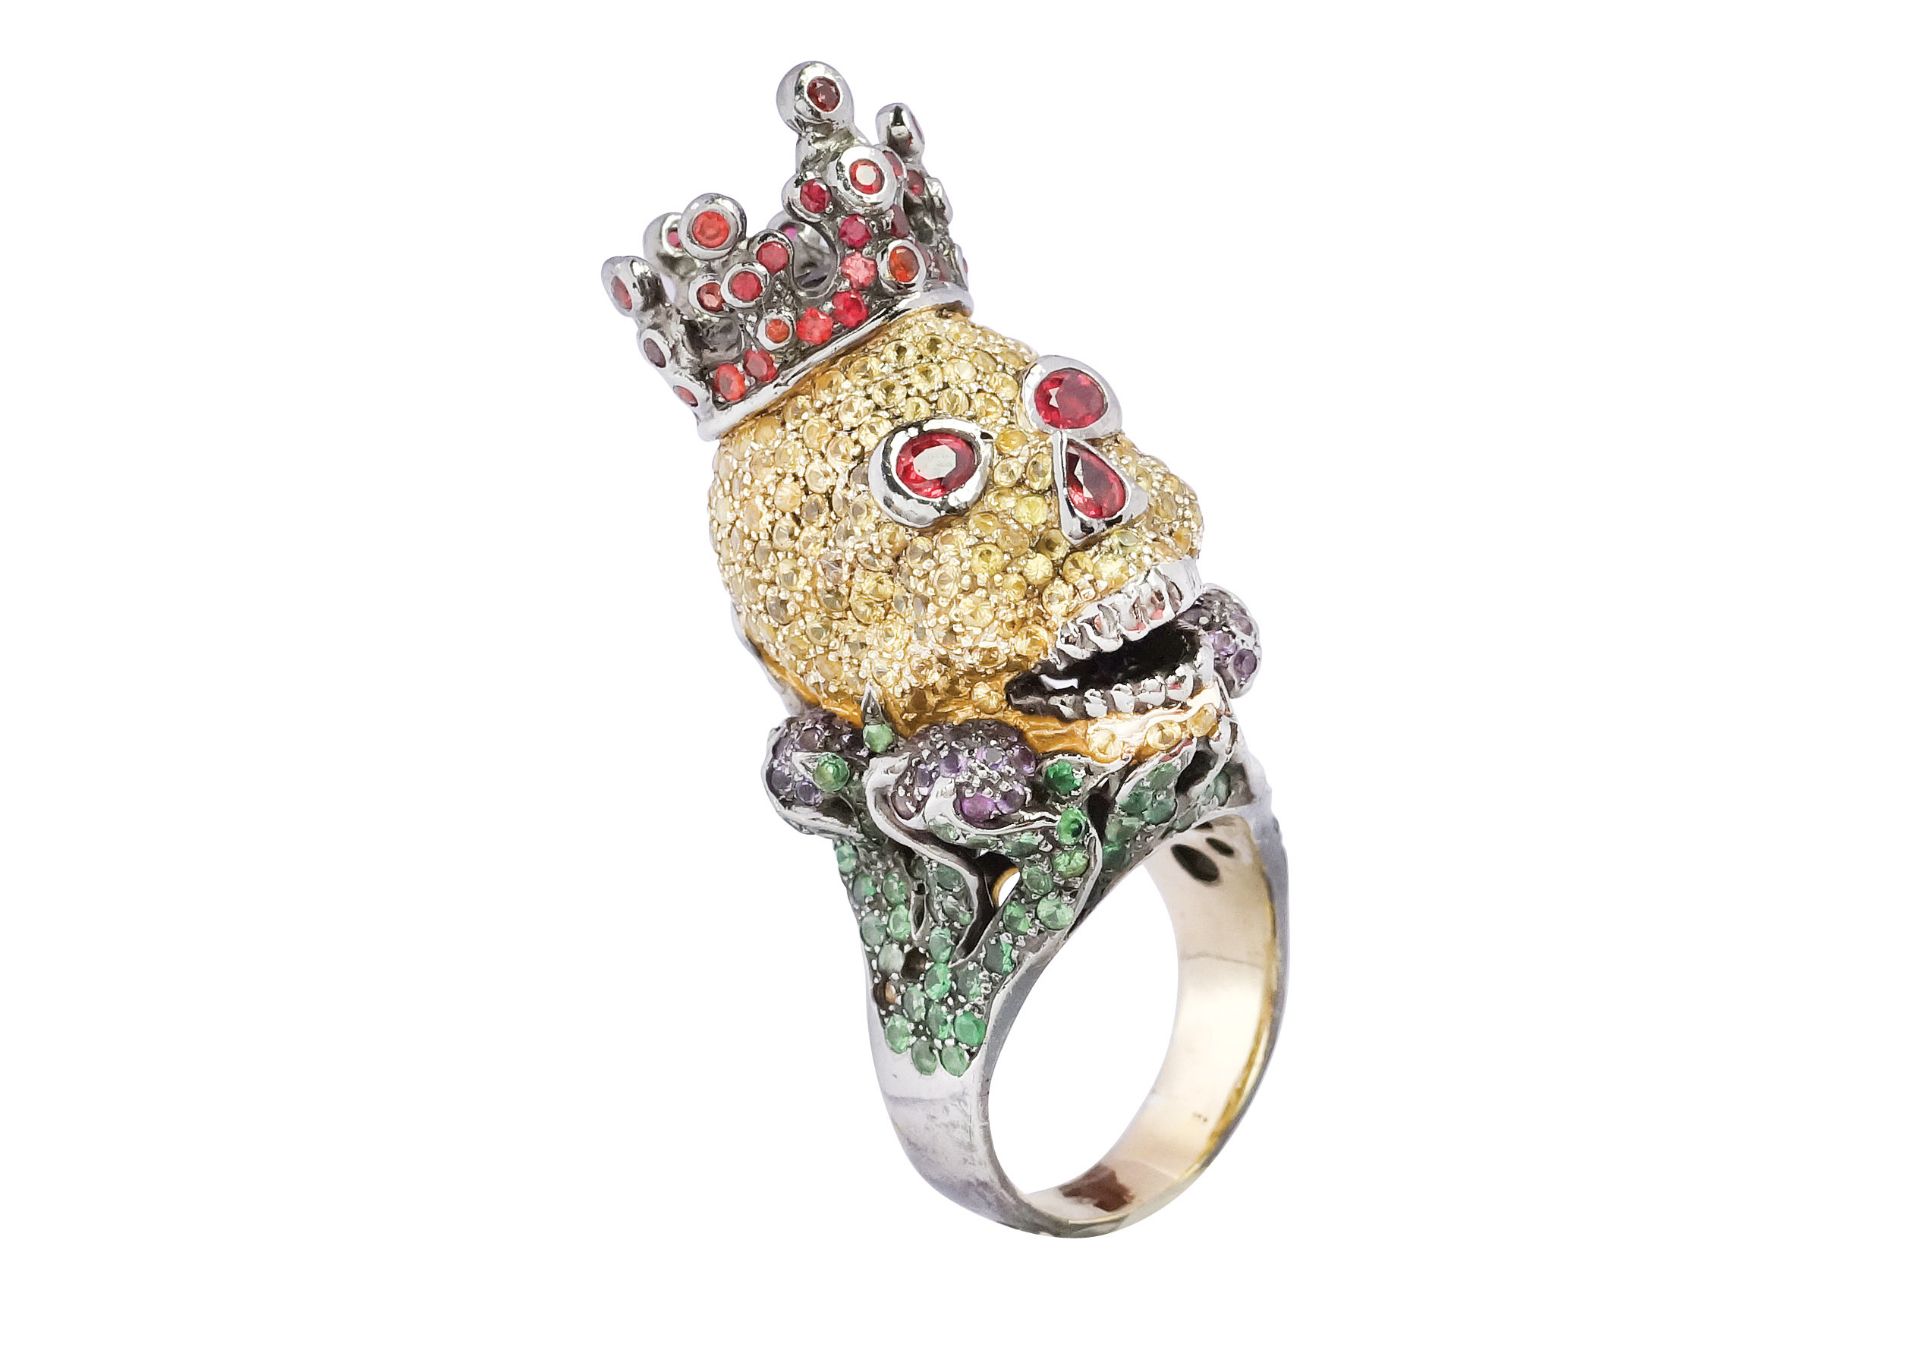 A silver and gemstone crowned skull ring